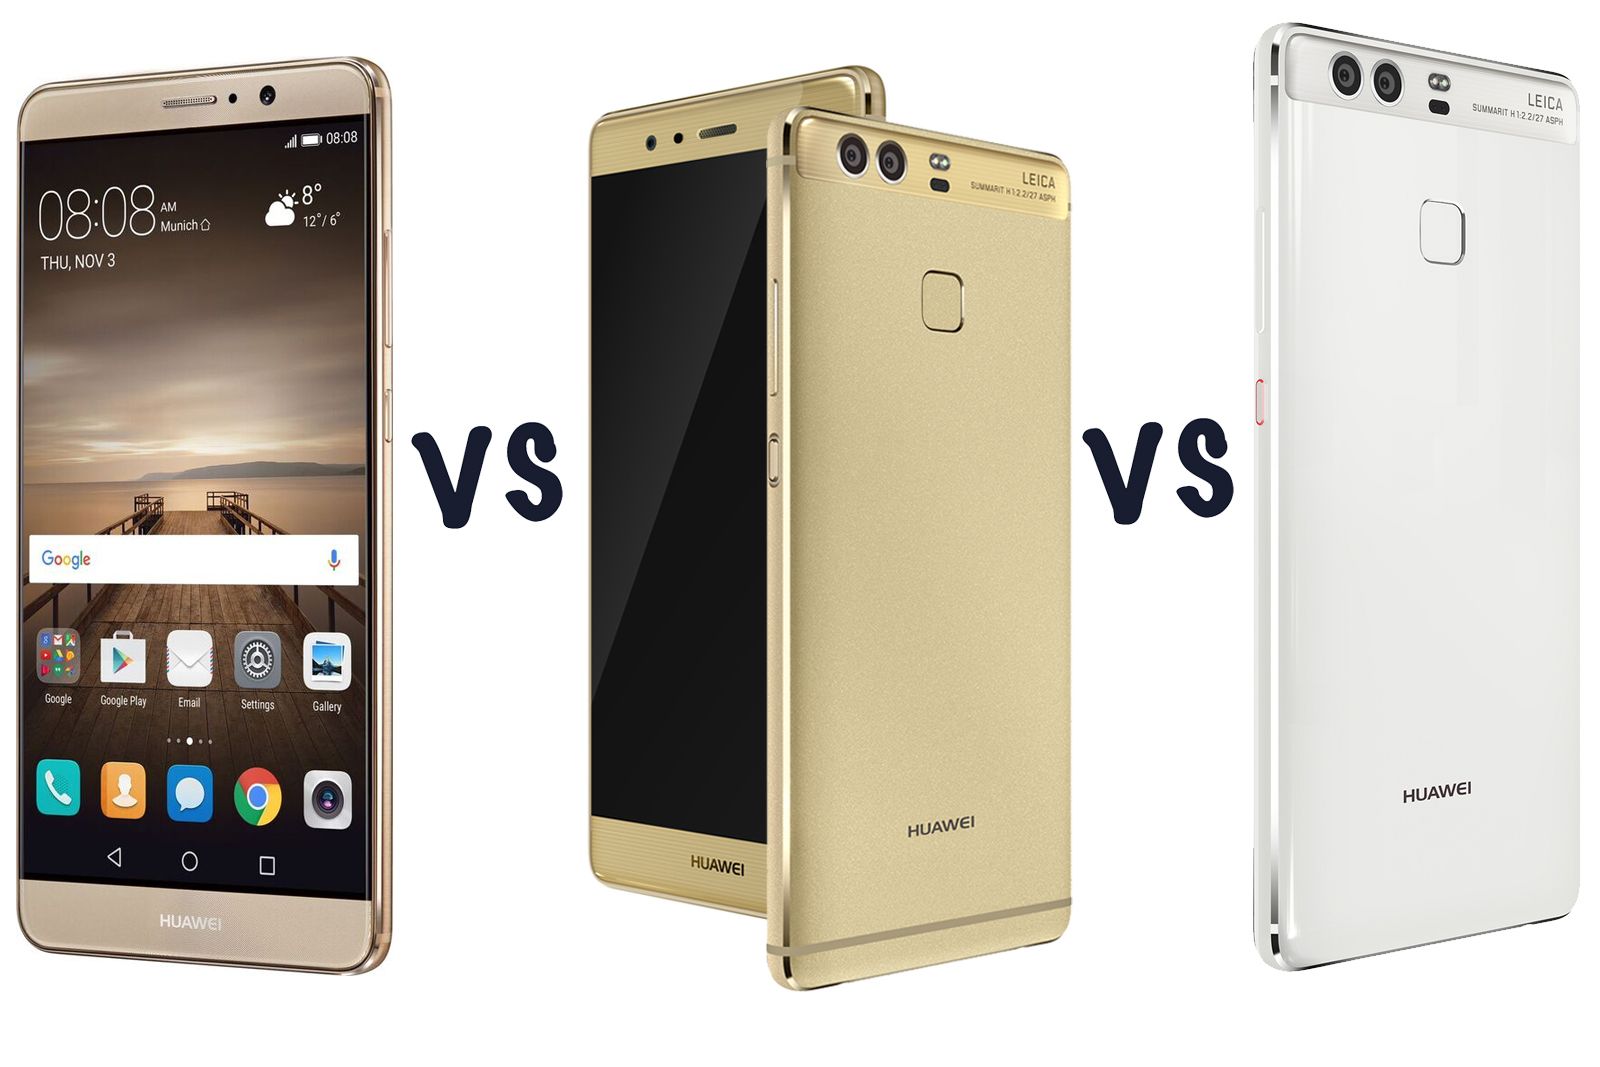 Huawei P9 vs P9 Plus vs Huawei 9: What's the difference?